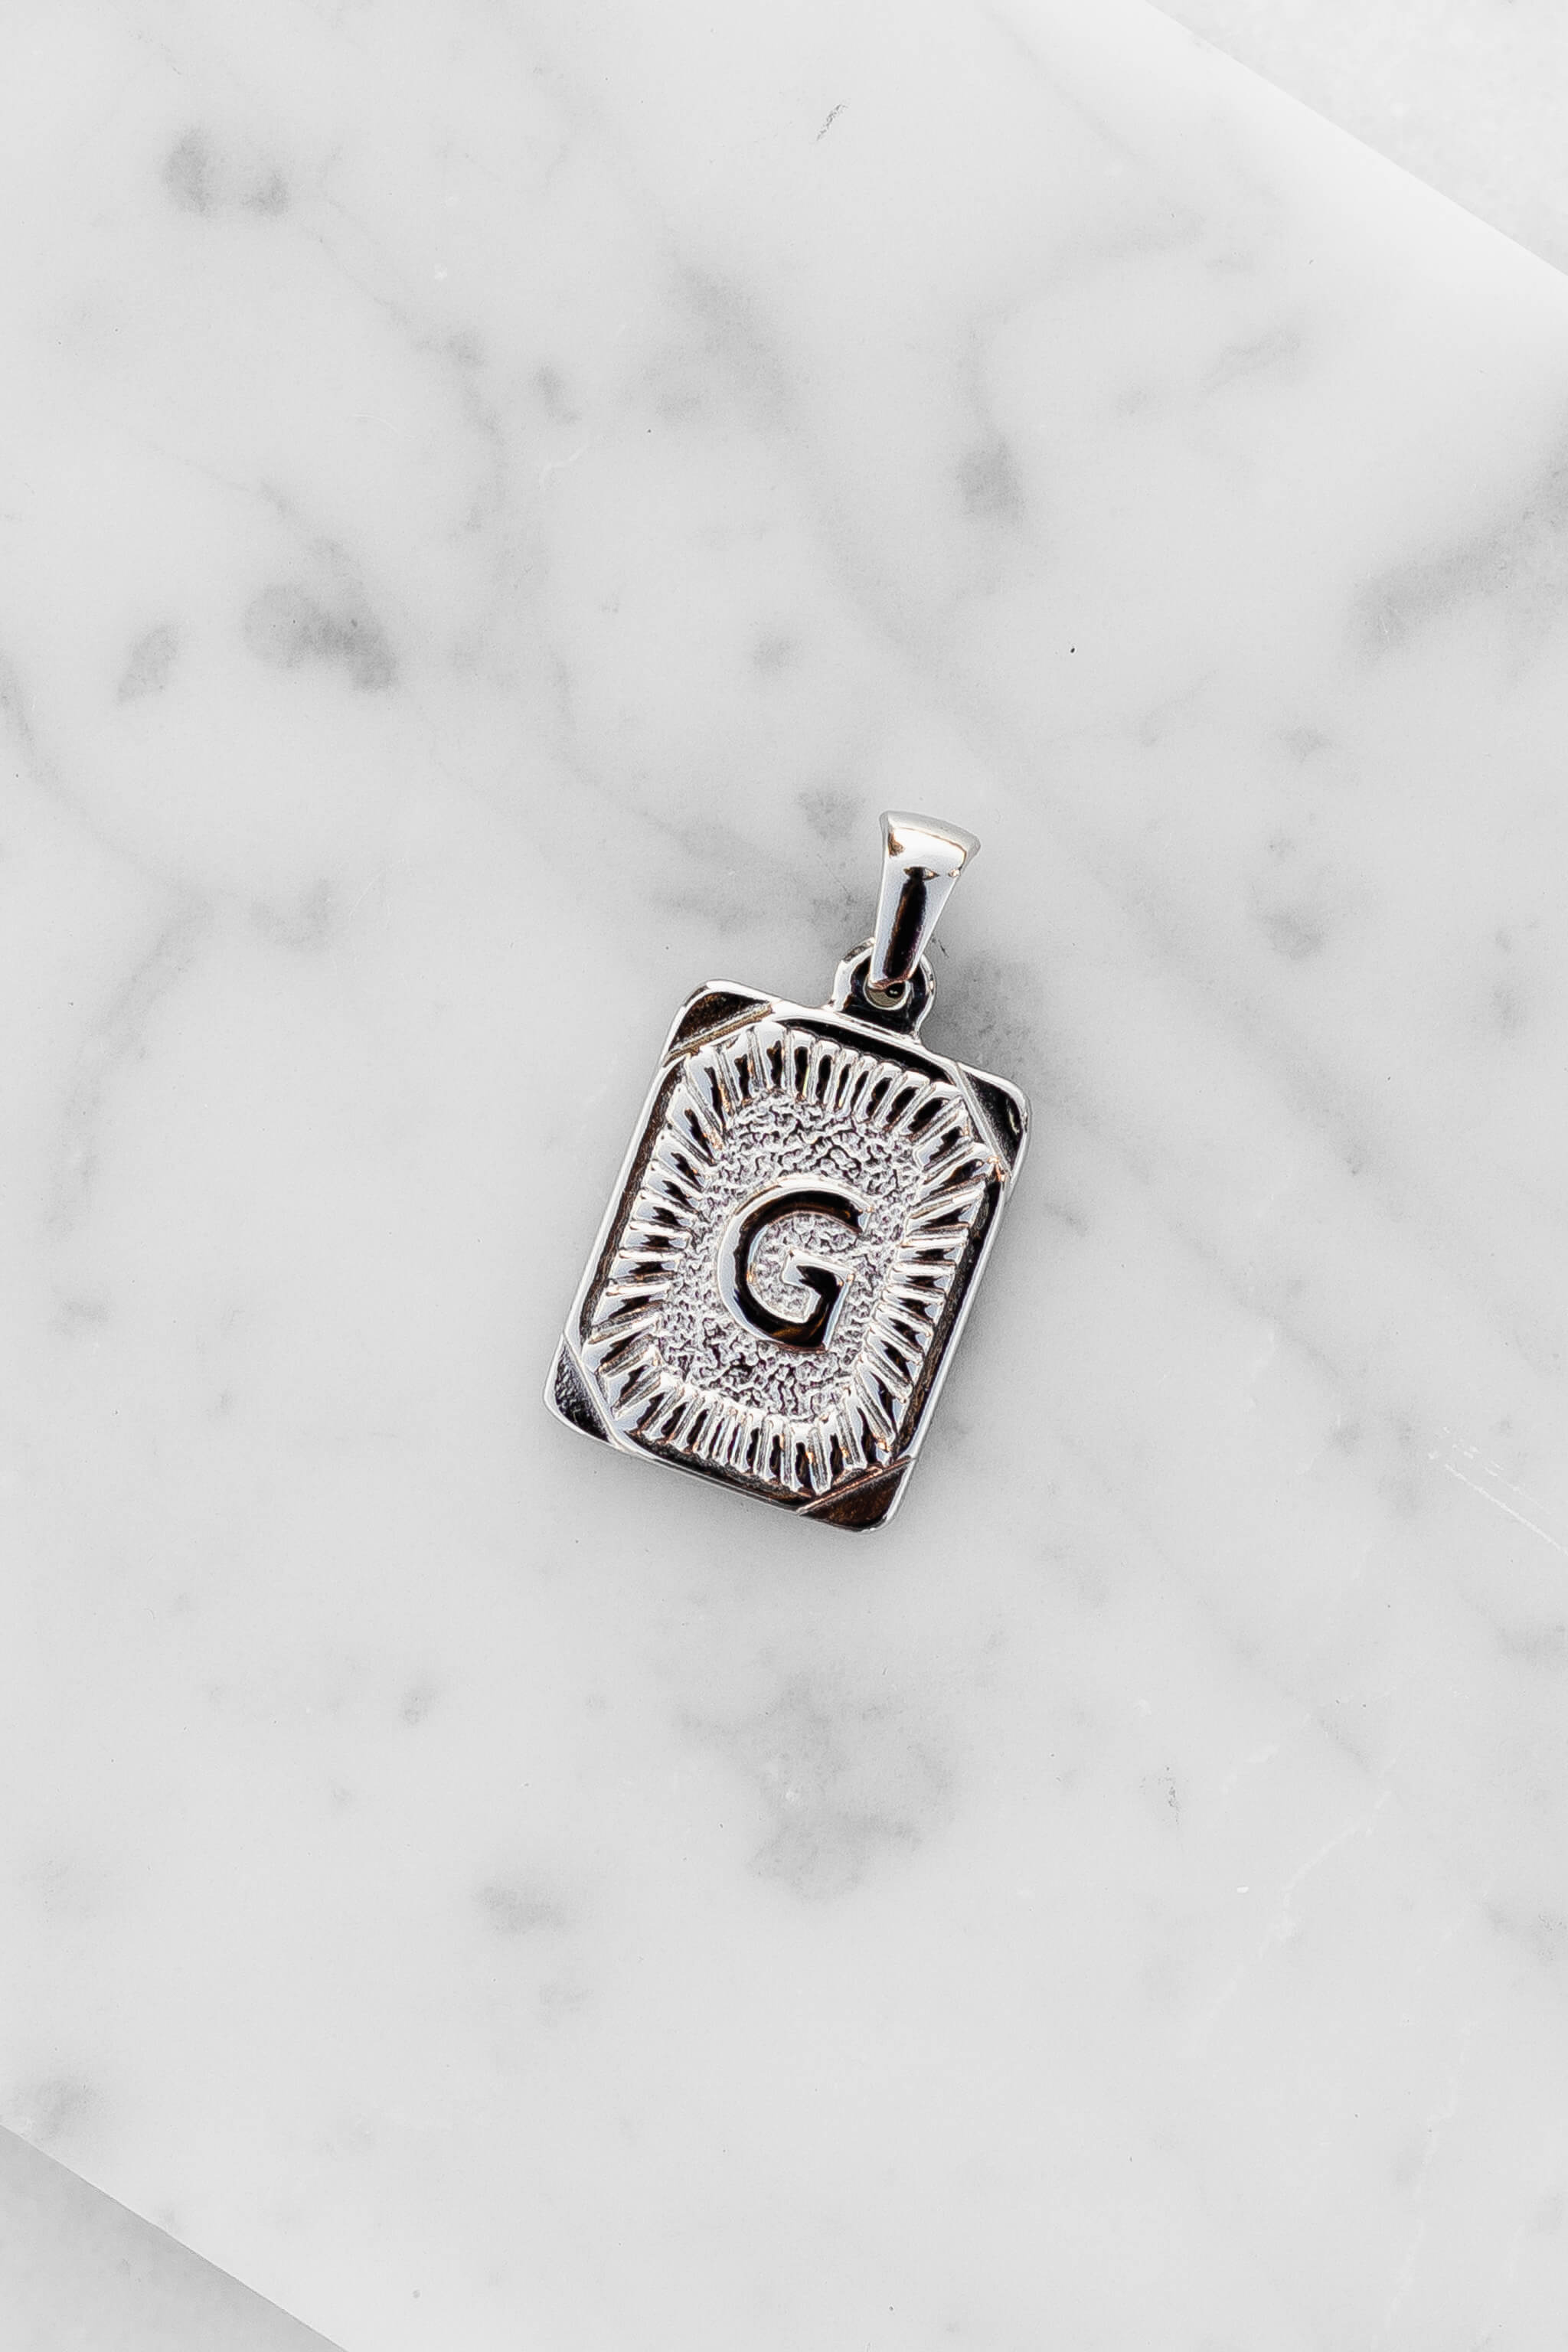 Silver Monogram Letter "G" Charm laying on a marble